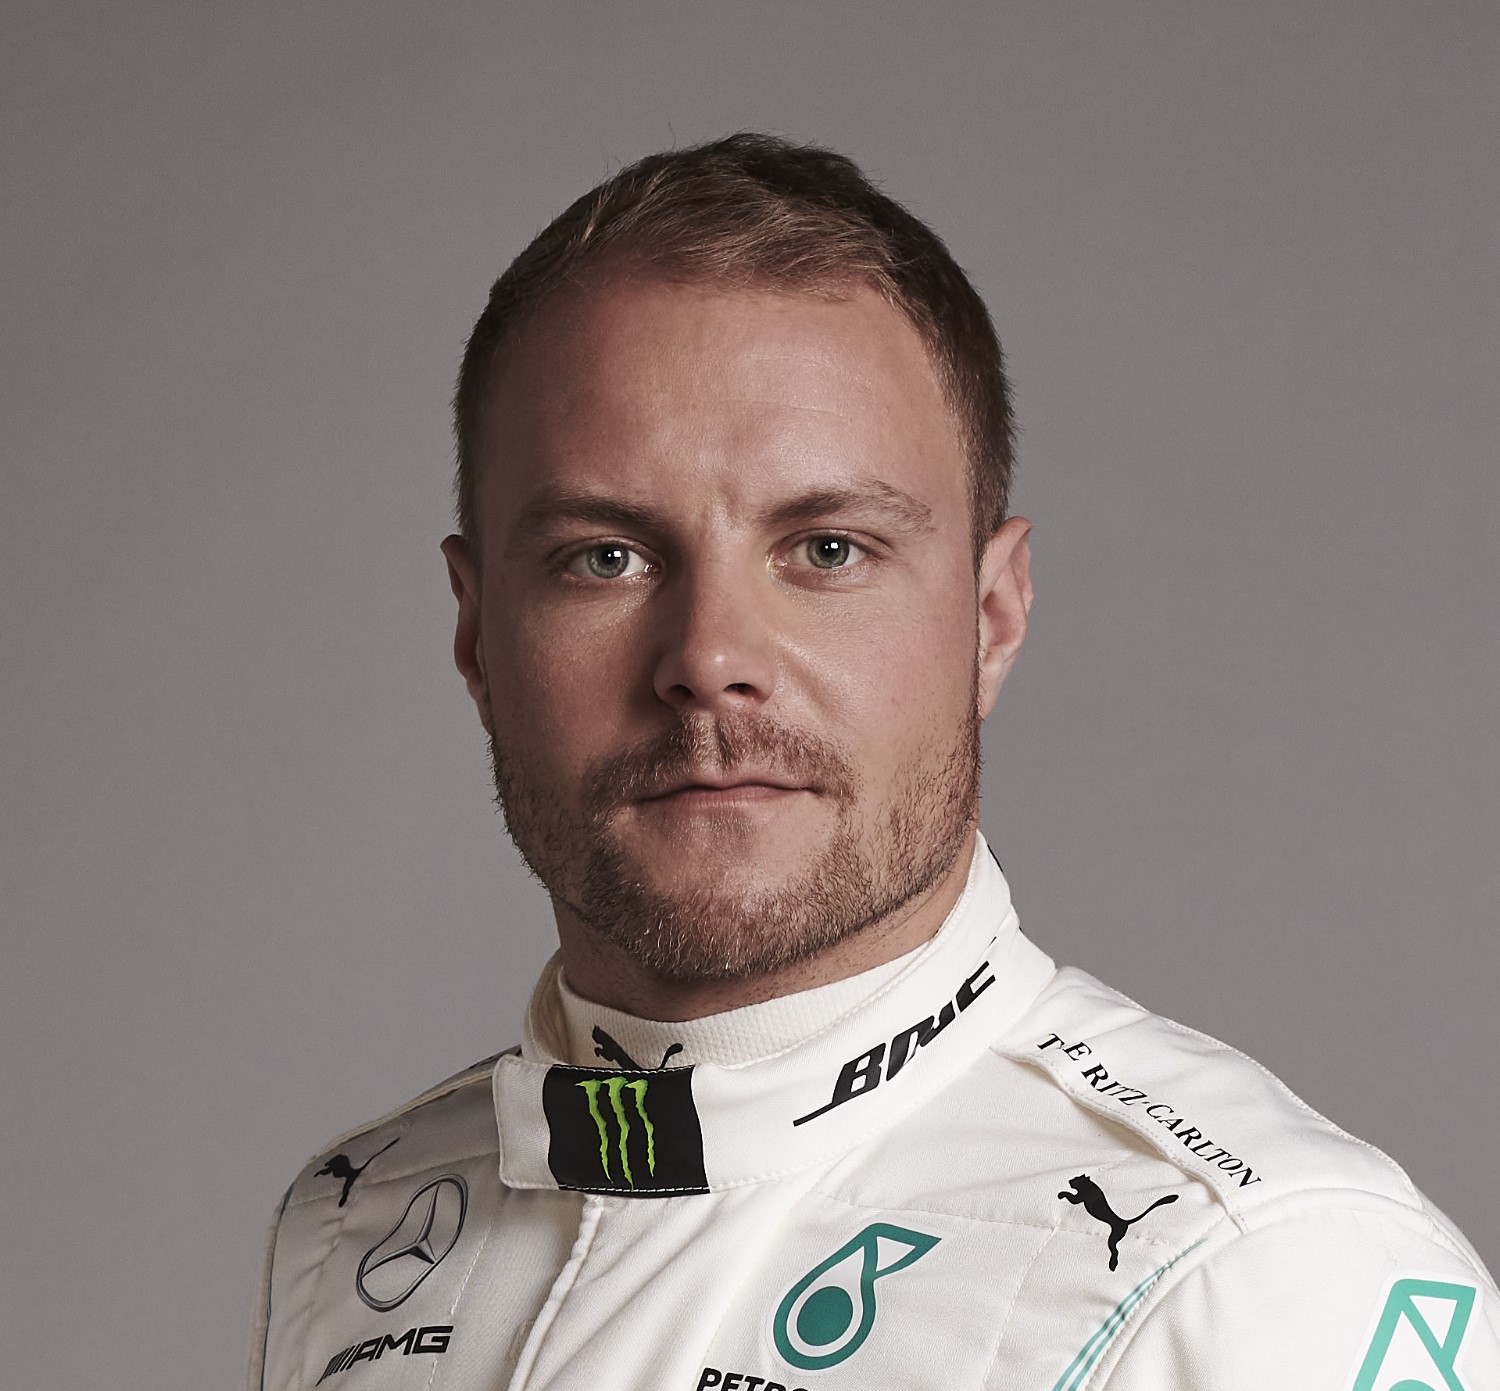 Would Wolff take Vettel over Bottas?